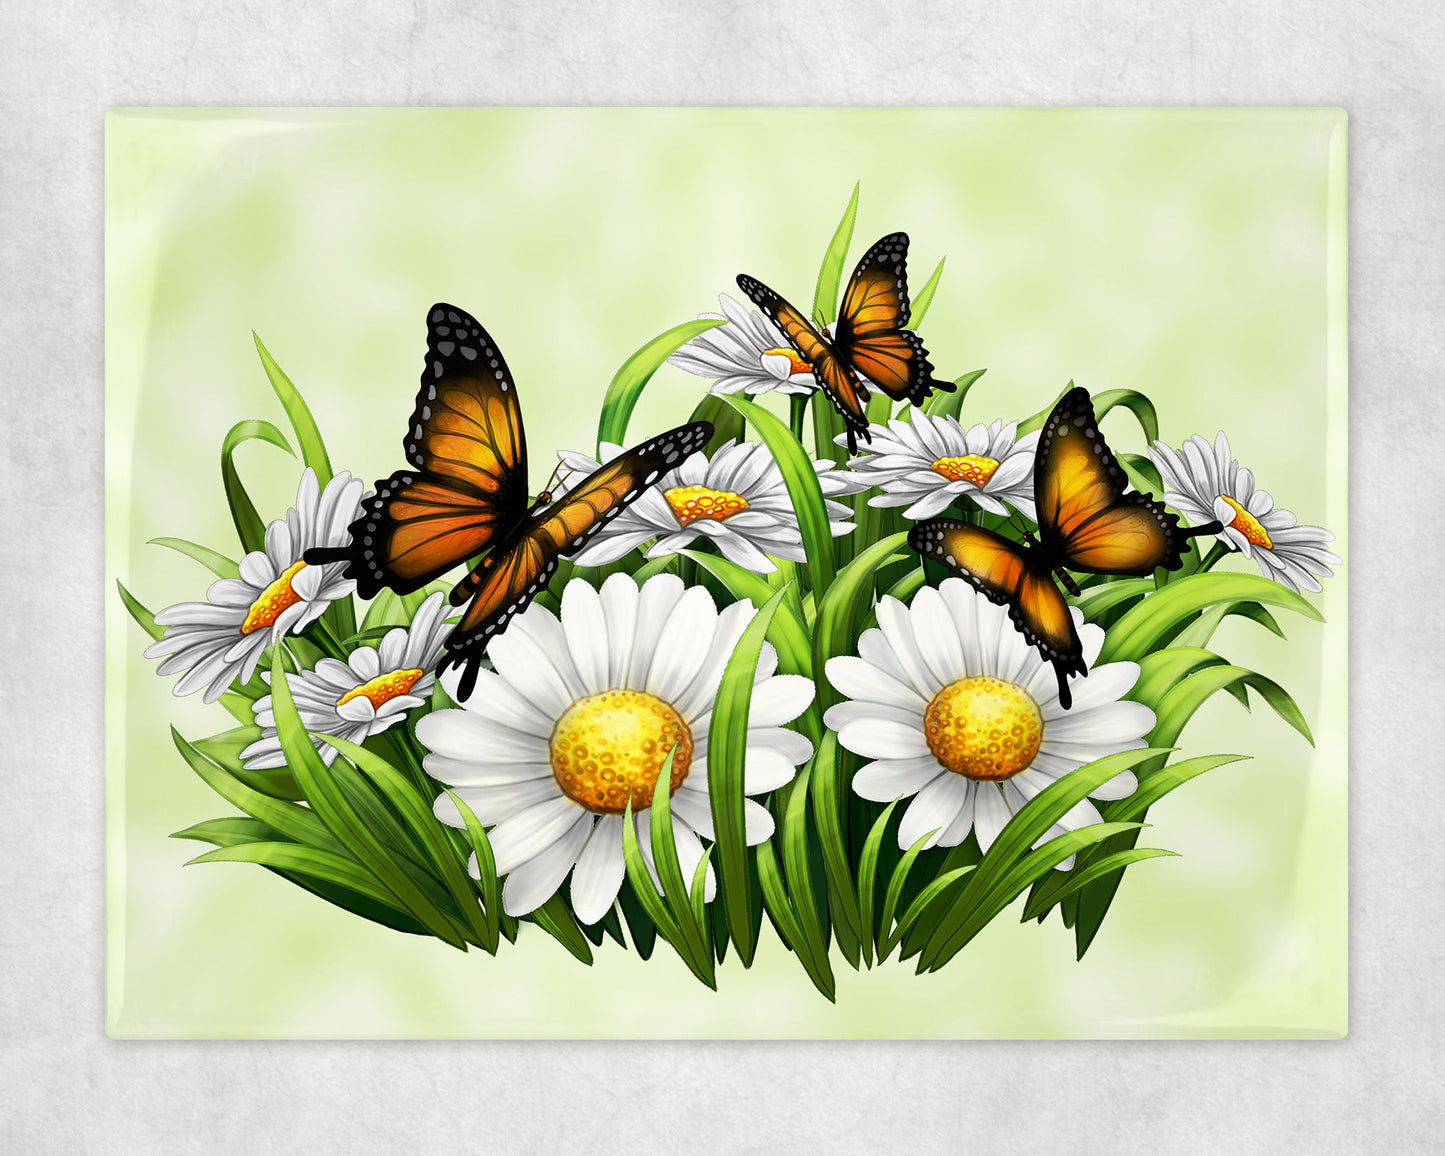 Monarch Butterflies and Daisies Art Decorative Ceramic Tile with Easel Back - 6x8 inches